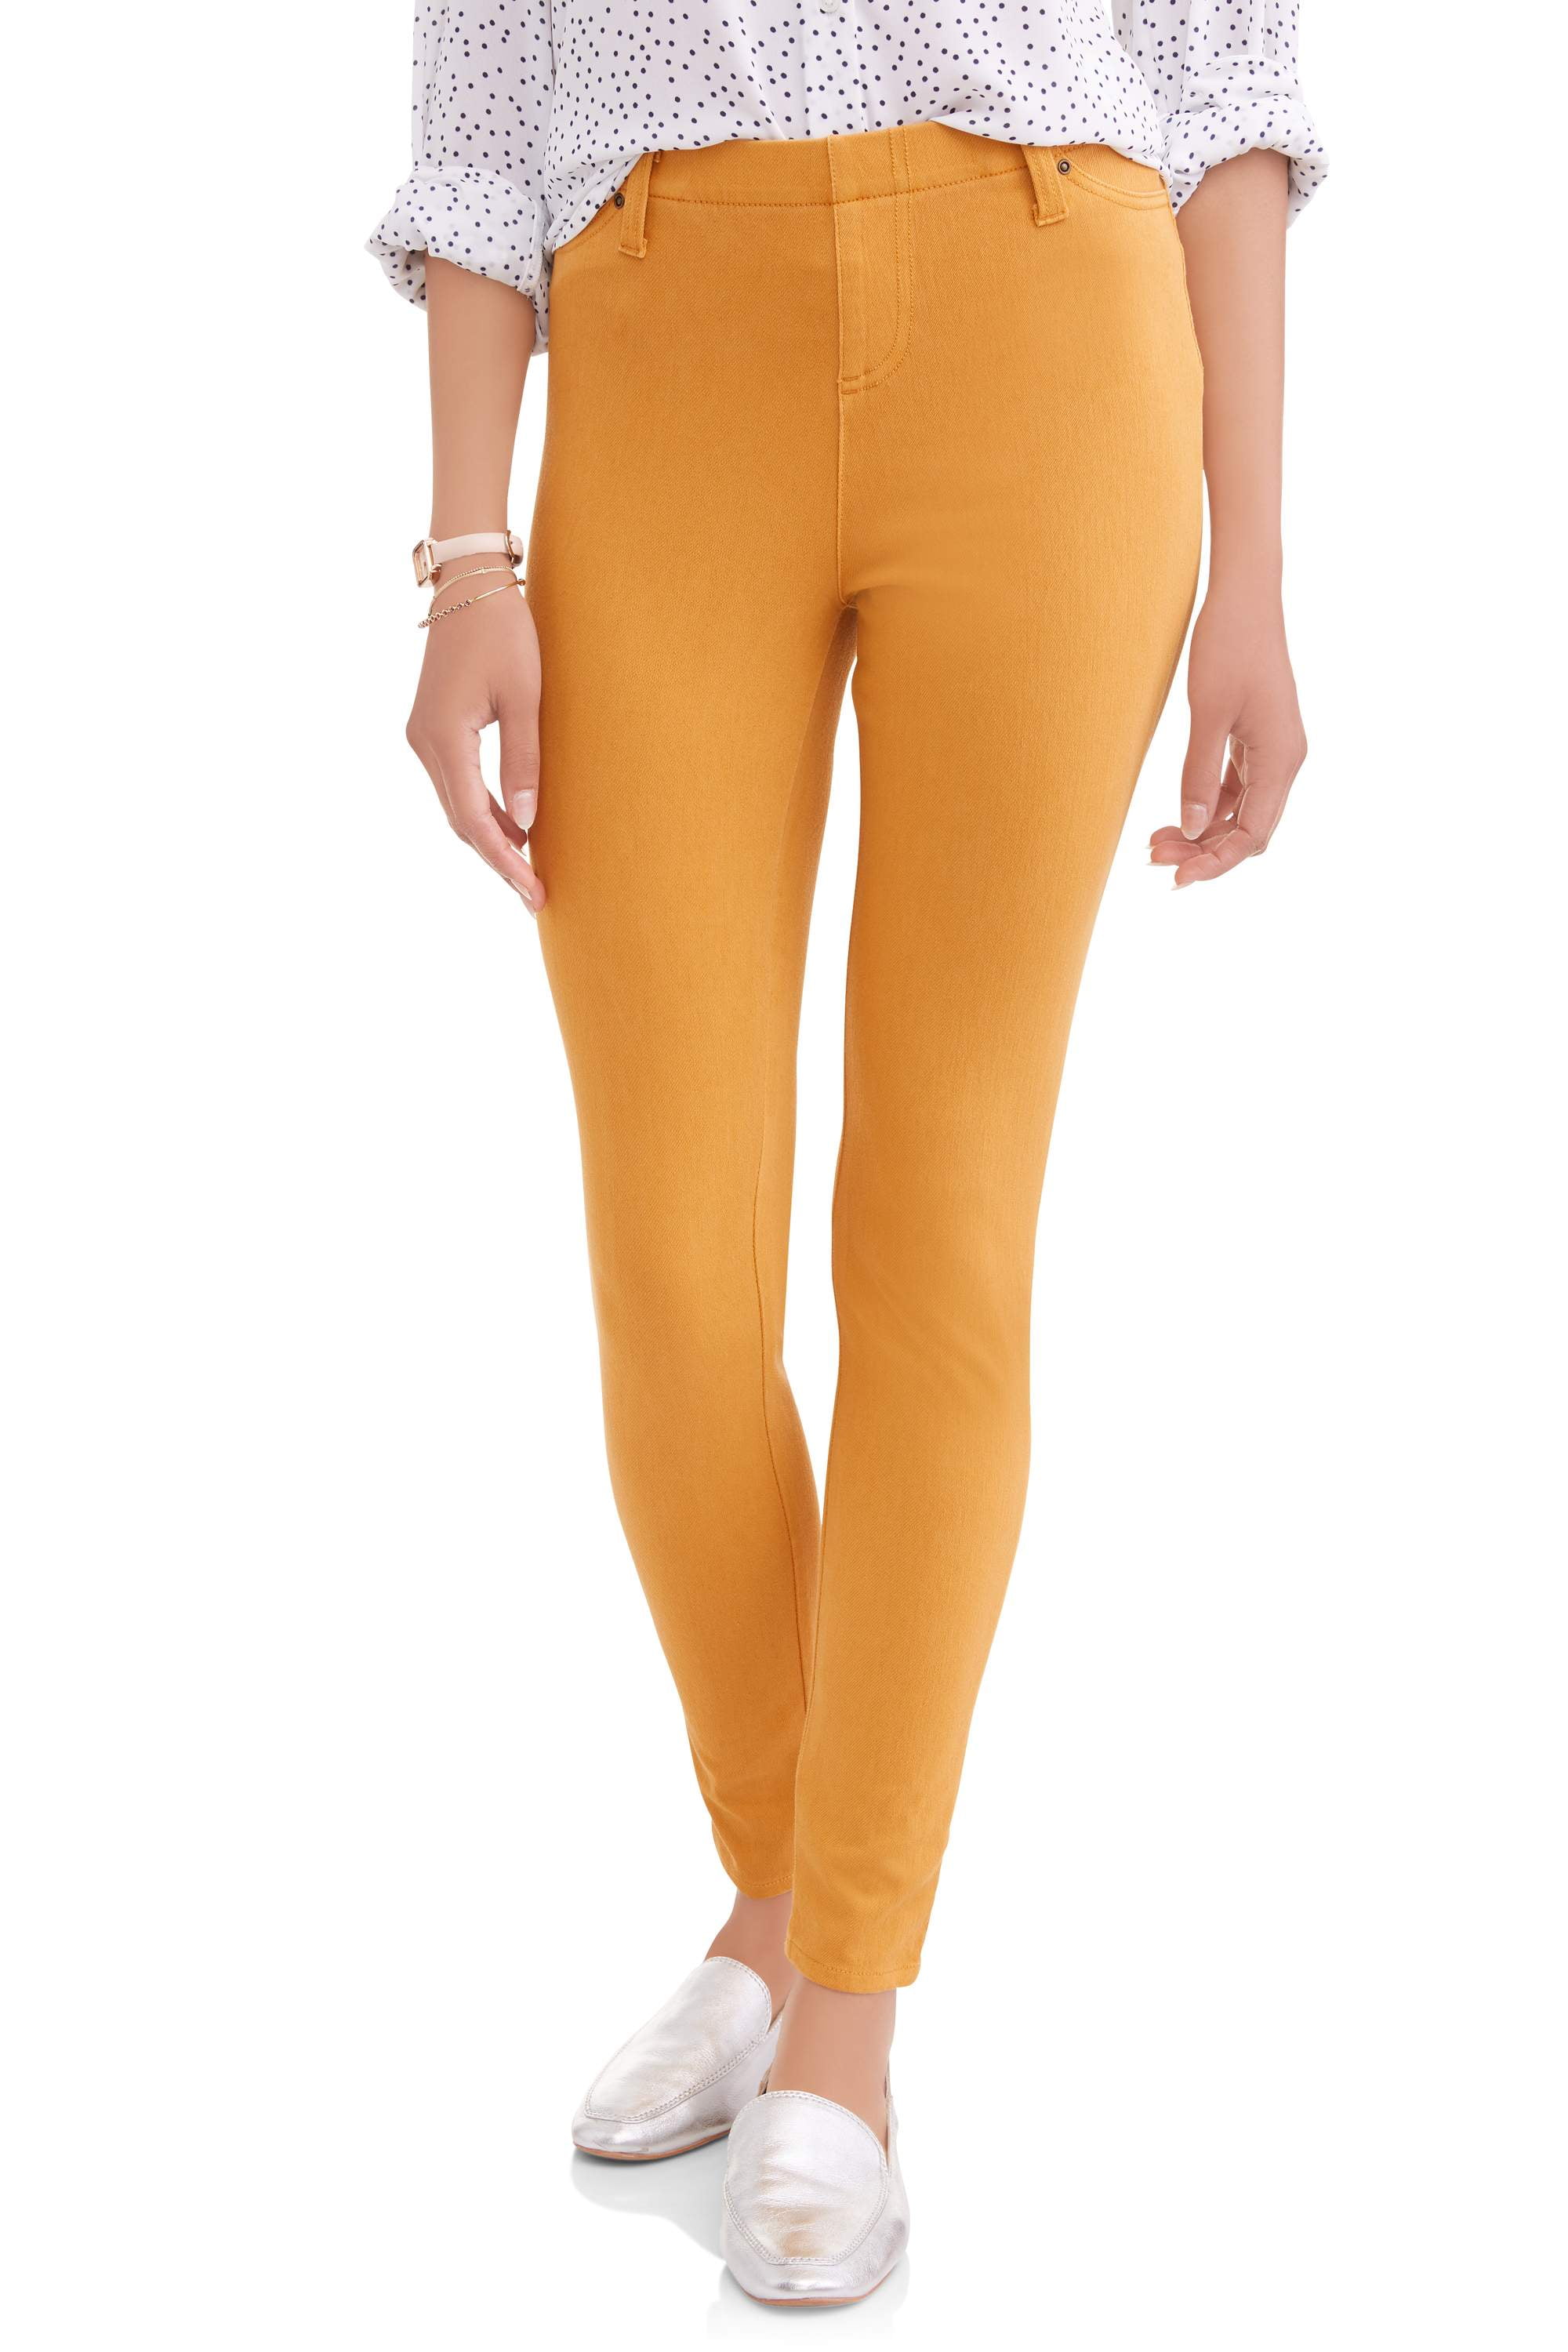 Cotton pant for regular wear 25 colors available Women Jeggings